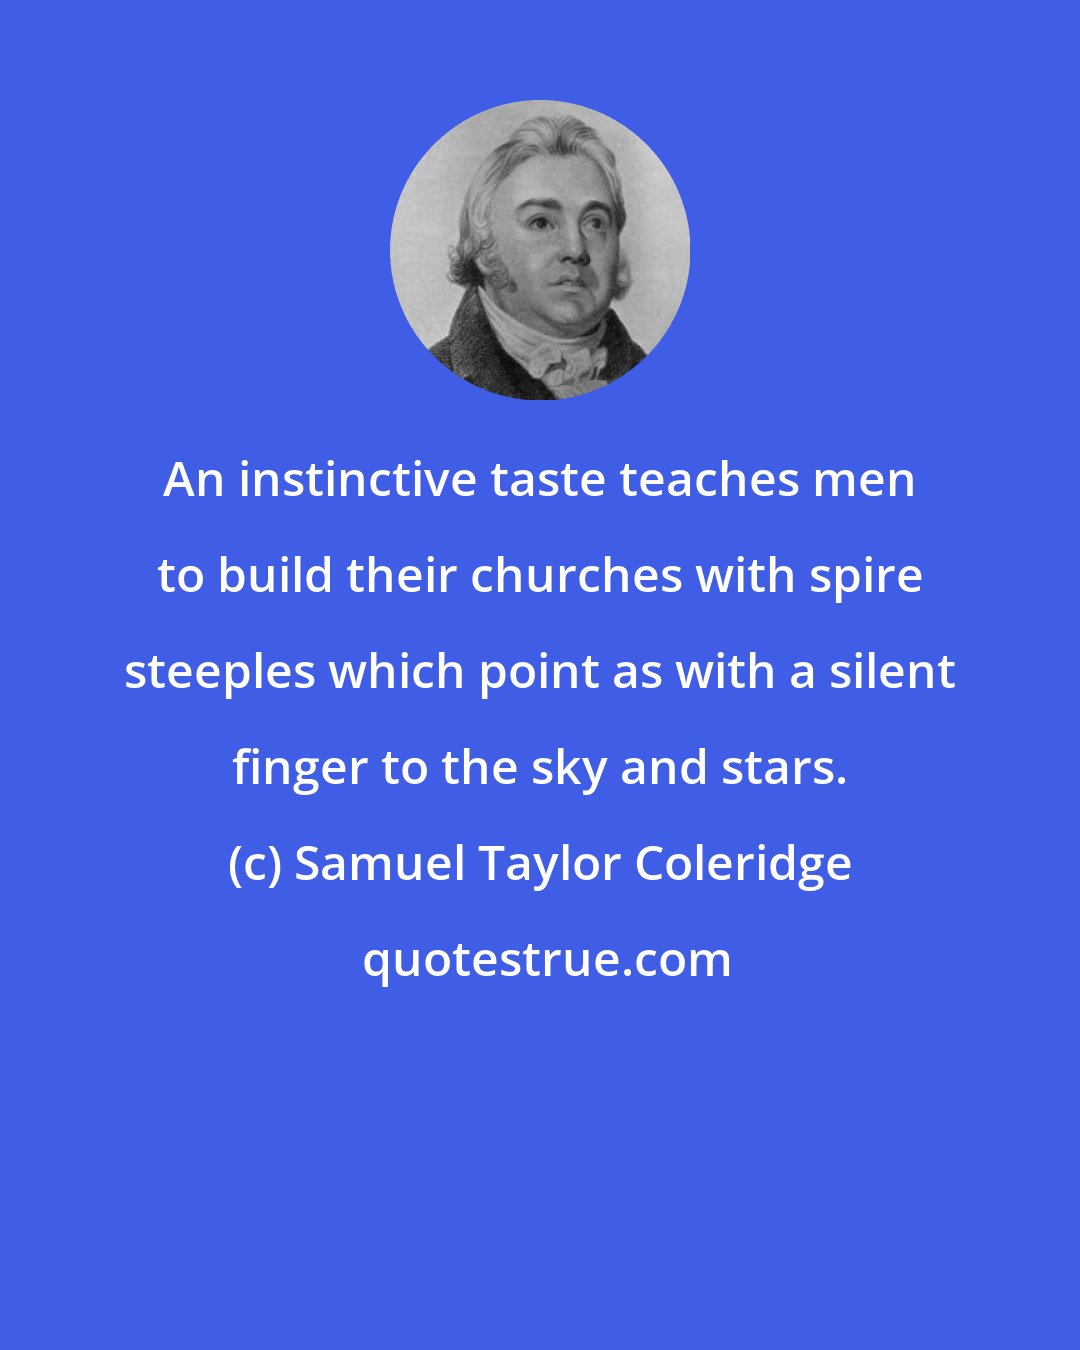 Samuel Taylor Coleridge: An instinctive taste teaches men to build their churches with spire steeples which point as with a silent finger to the sky and stars.